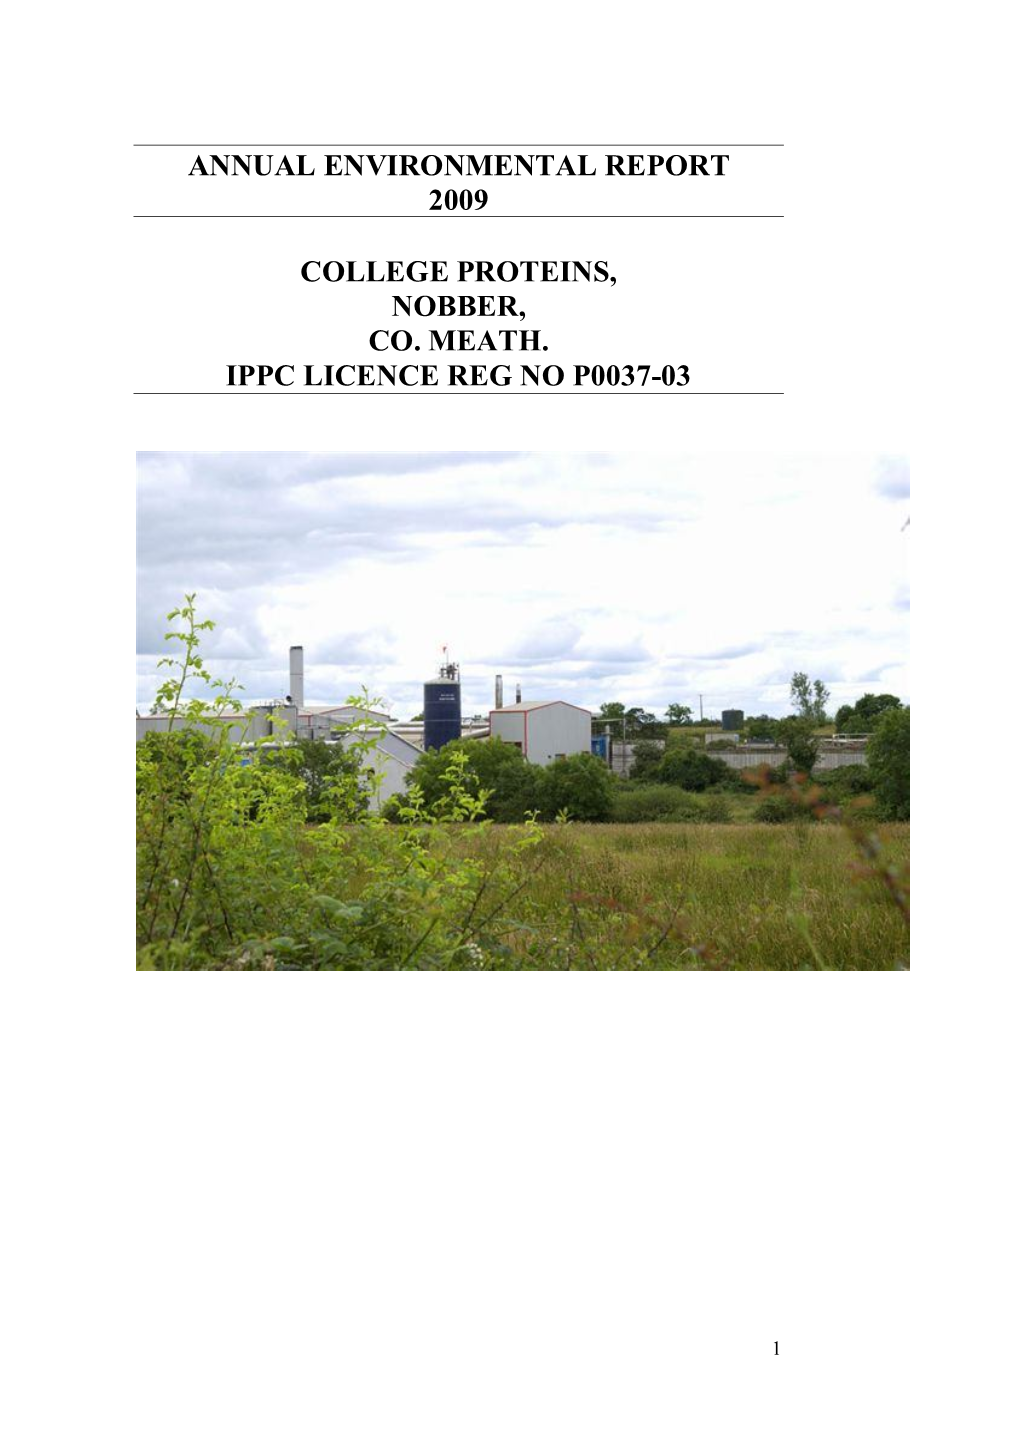 Annual Environmental Report 2009 College Proteins, Nobber, Co. Meath